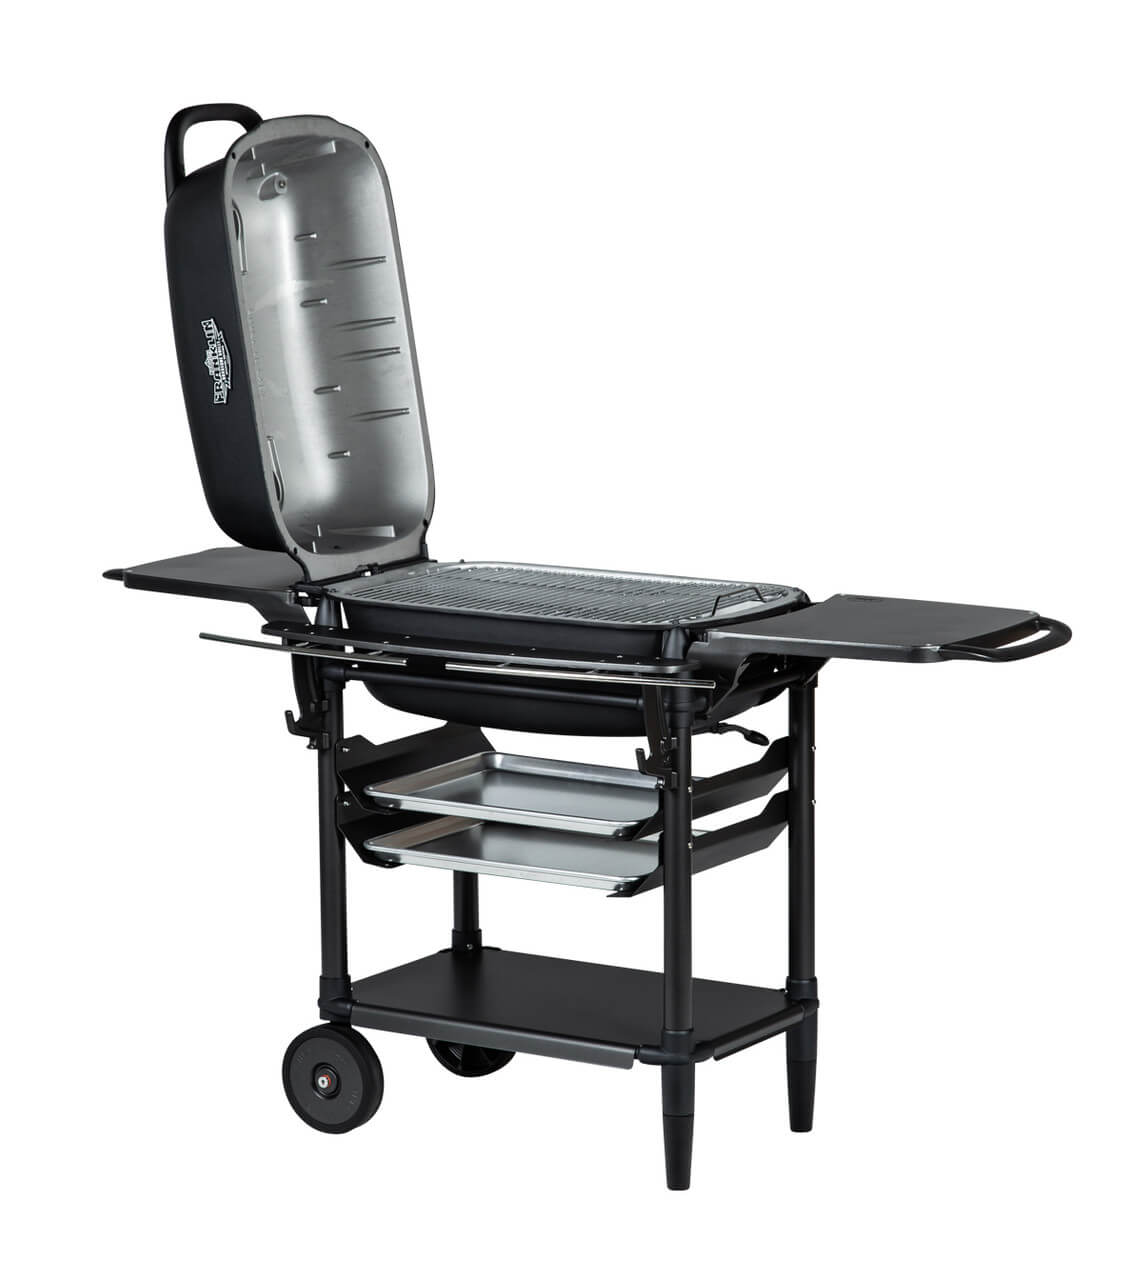 PK Grills PK300AF Grill and Smoker - Coal